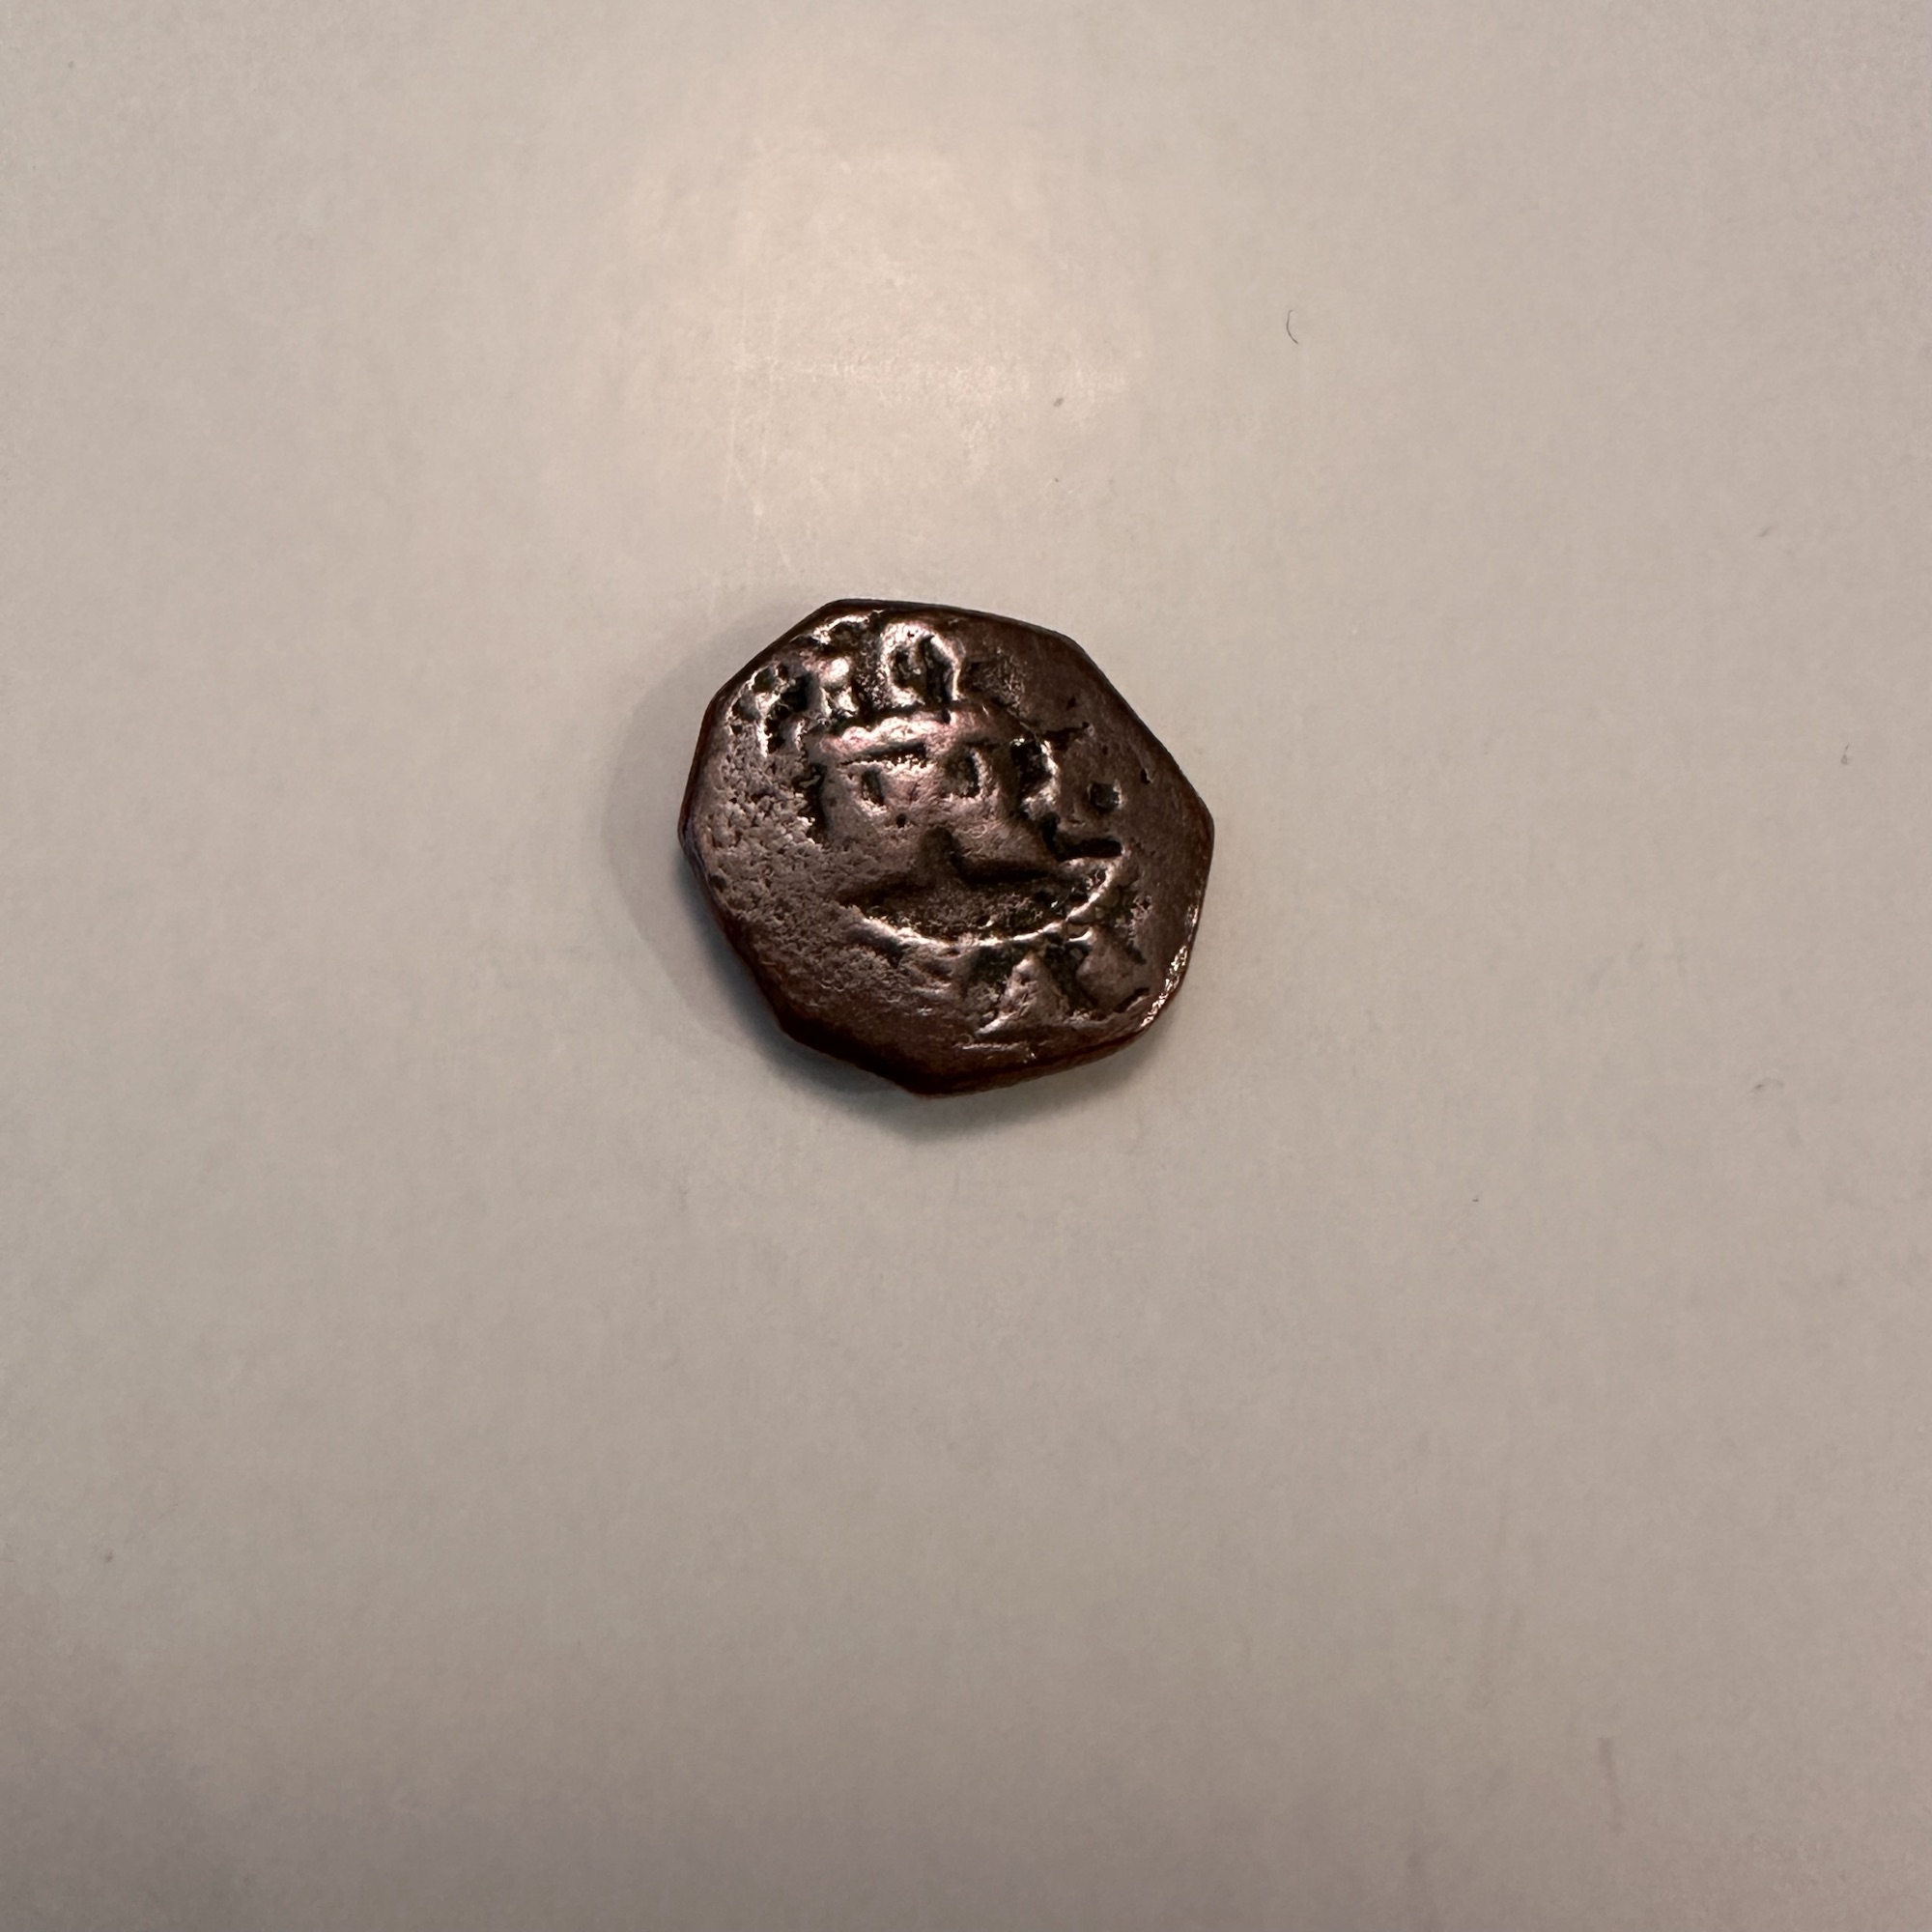 1600s spanish pirate coin, great patina